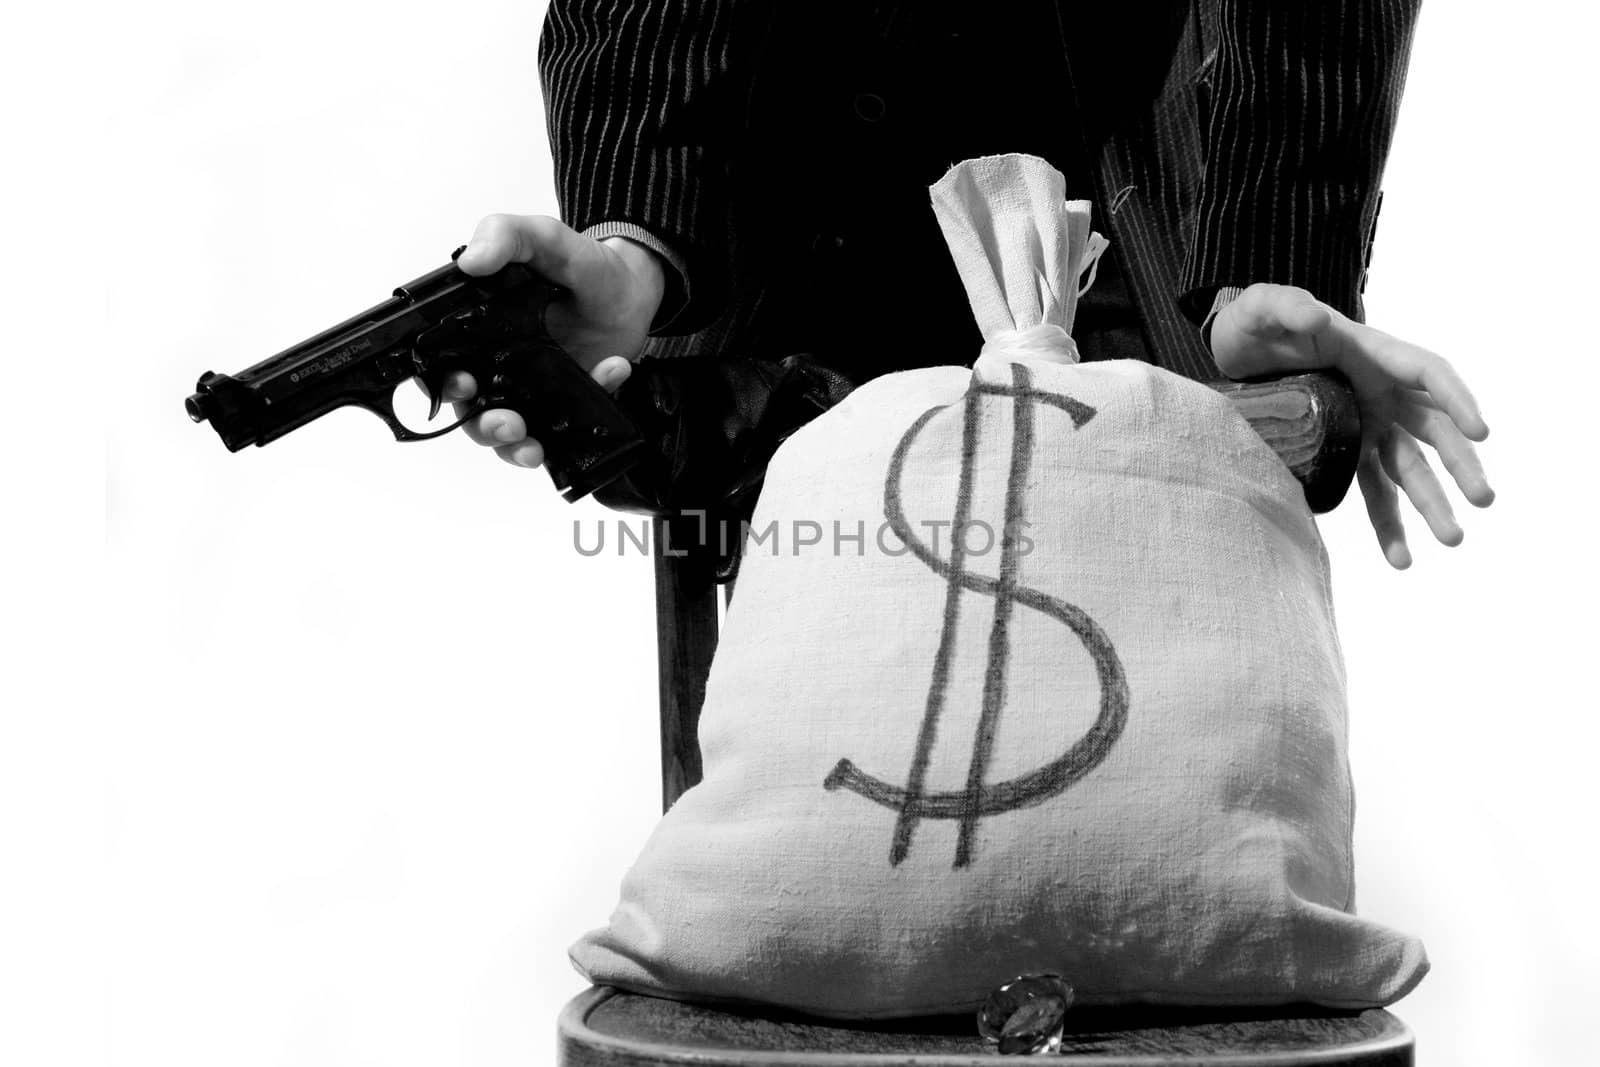 An image of a bag with money and a man standing behind it